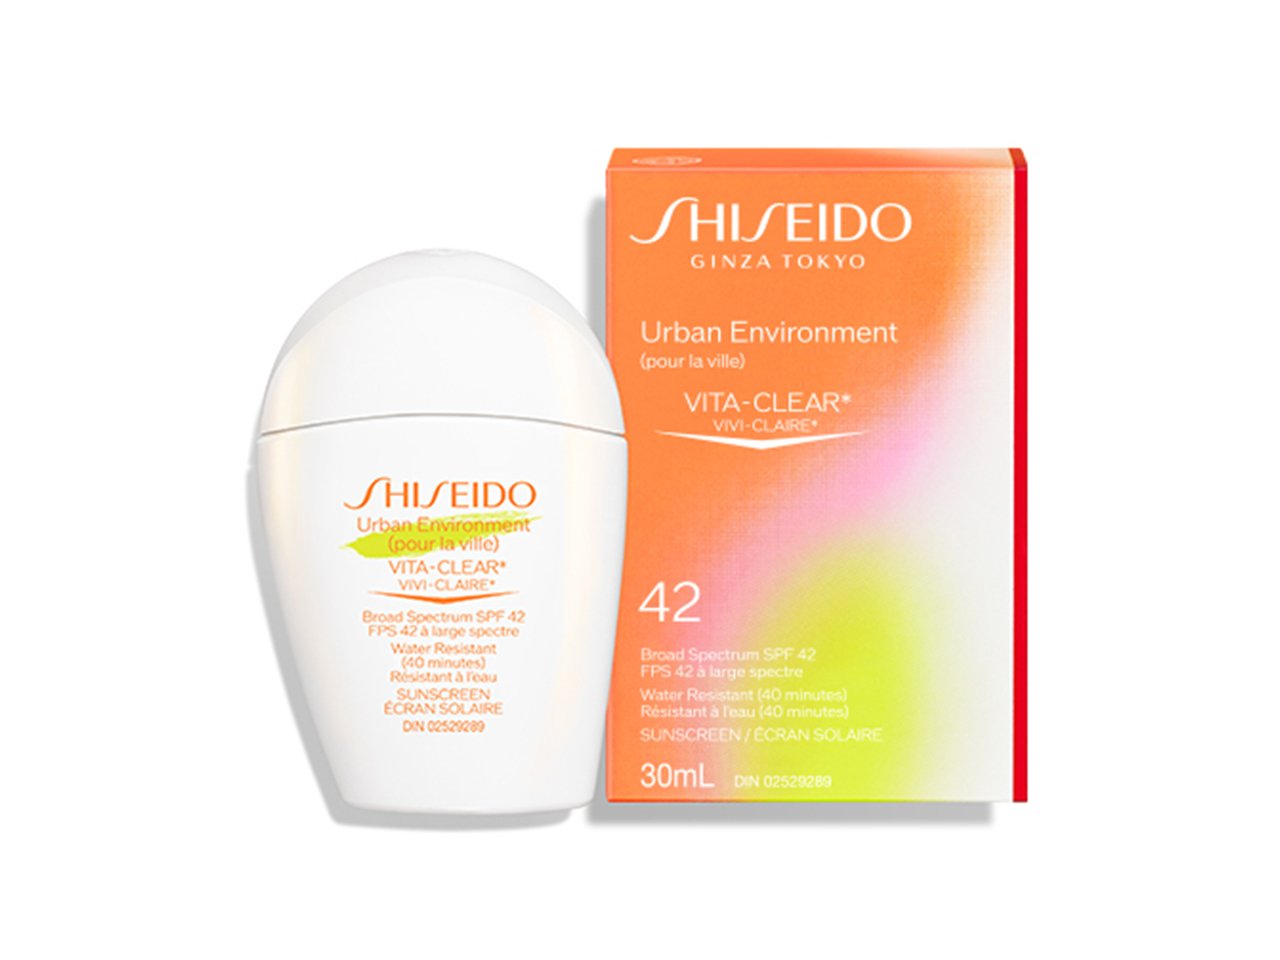 A bottle of best beauty product for July 2023 Shiseido Urban Environment Vita-Clear Sunscreen SPF 42 pictured next to its orange ombre box.